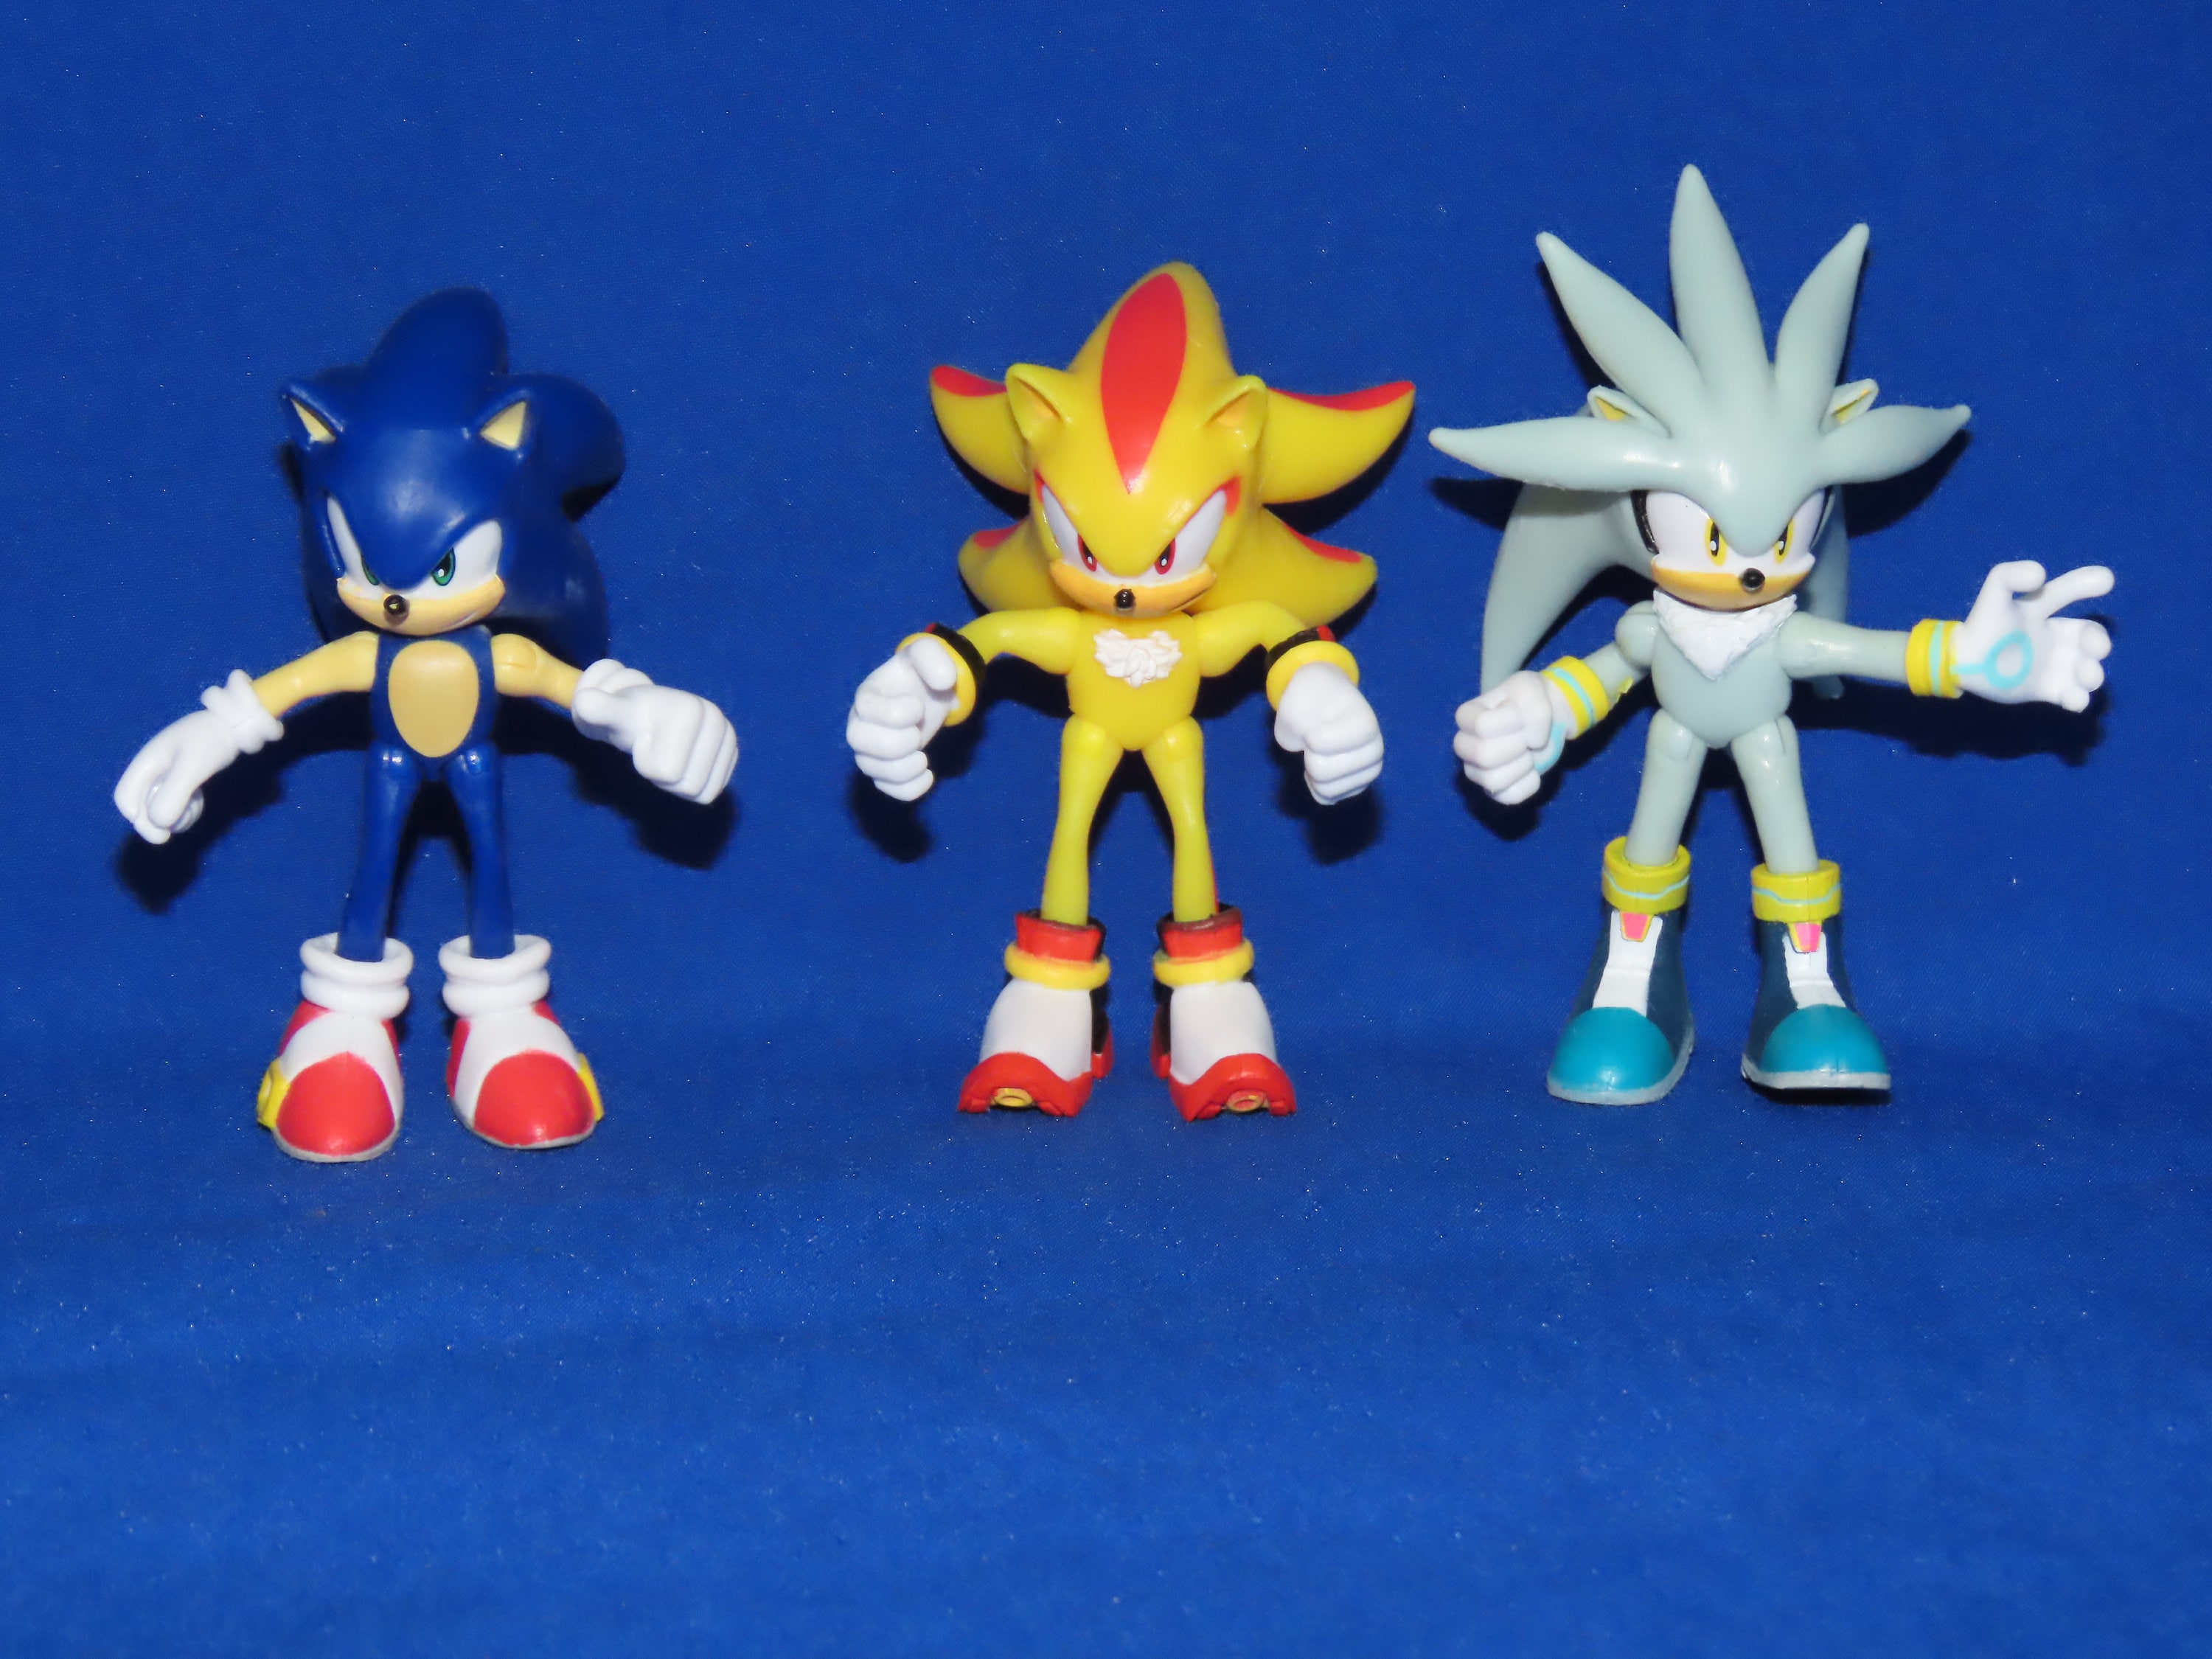 Sonic Prime 5 Articulated Action Figure - Shadow Green Hill Zone